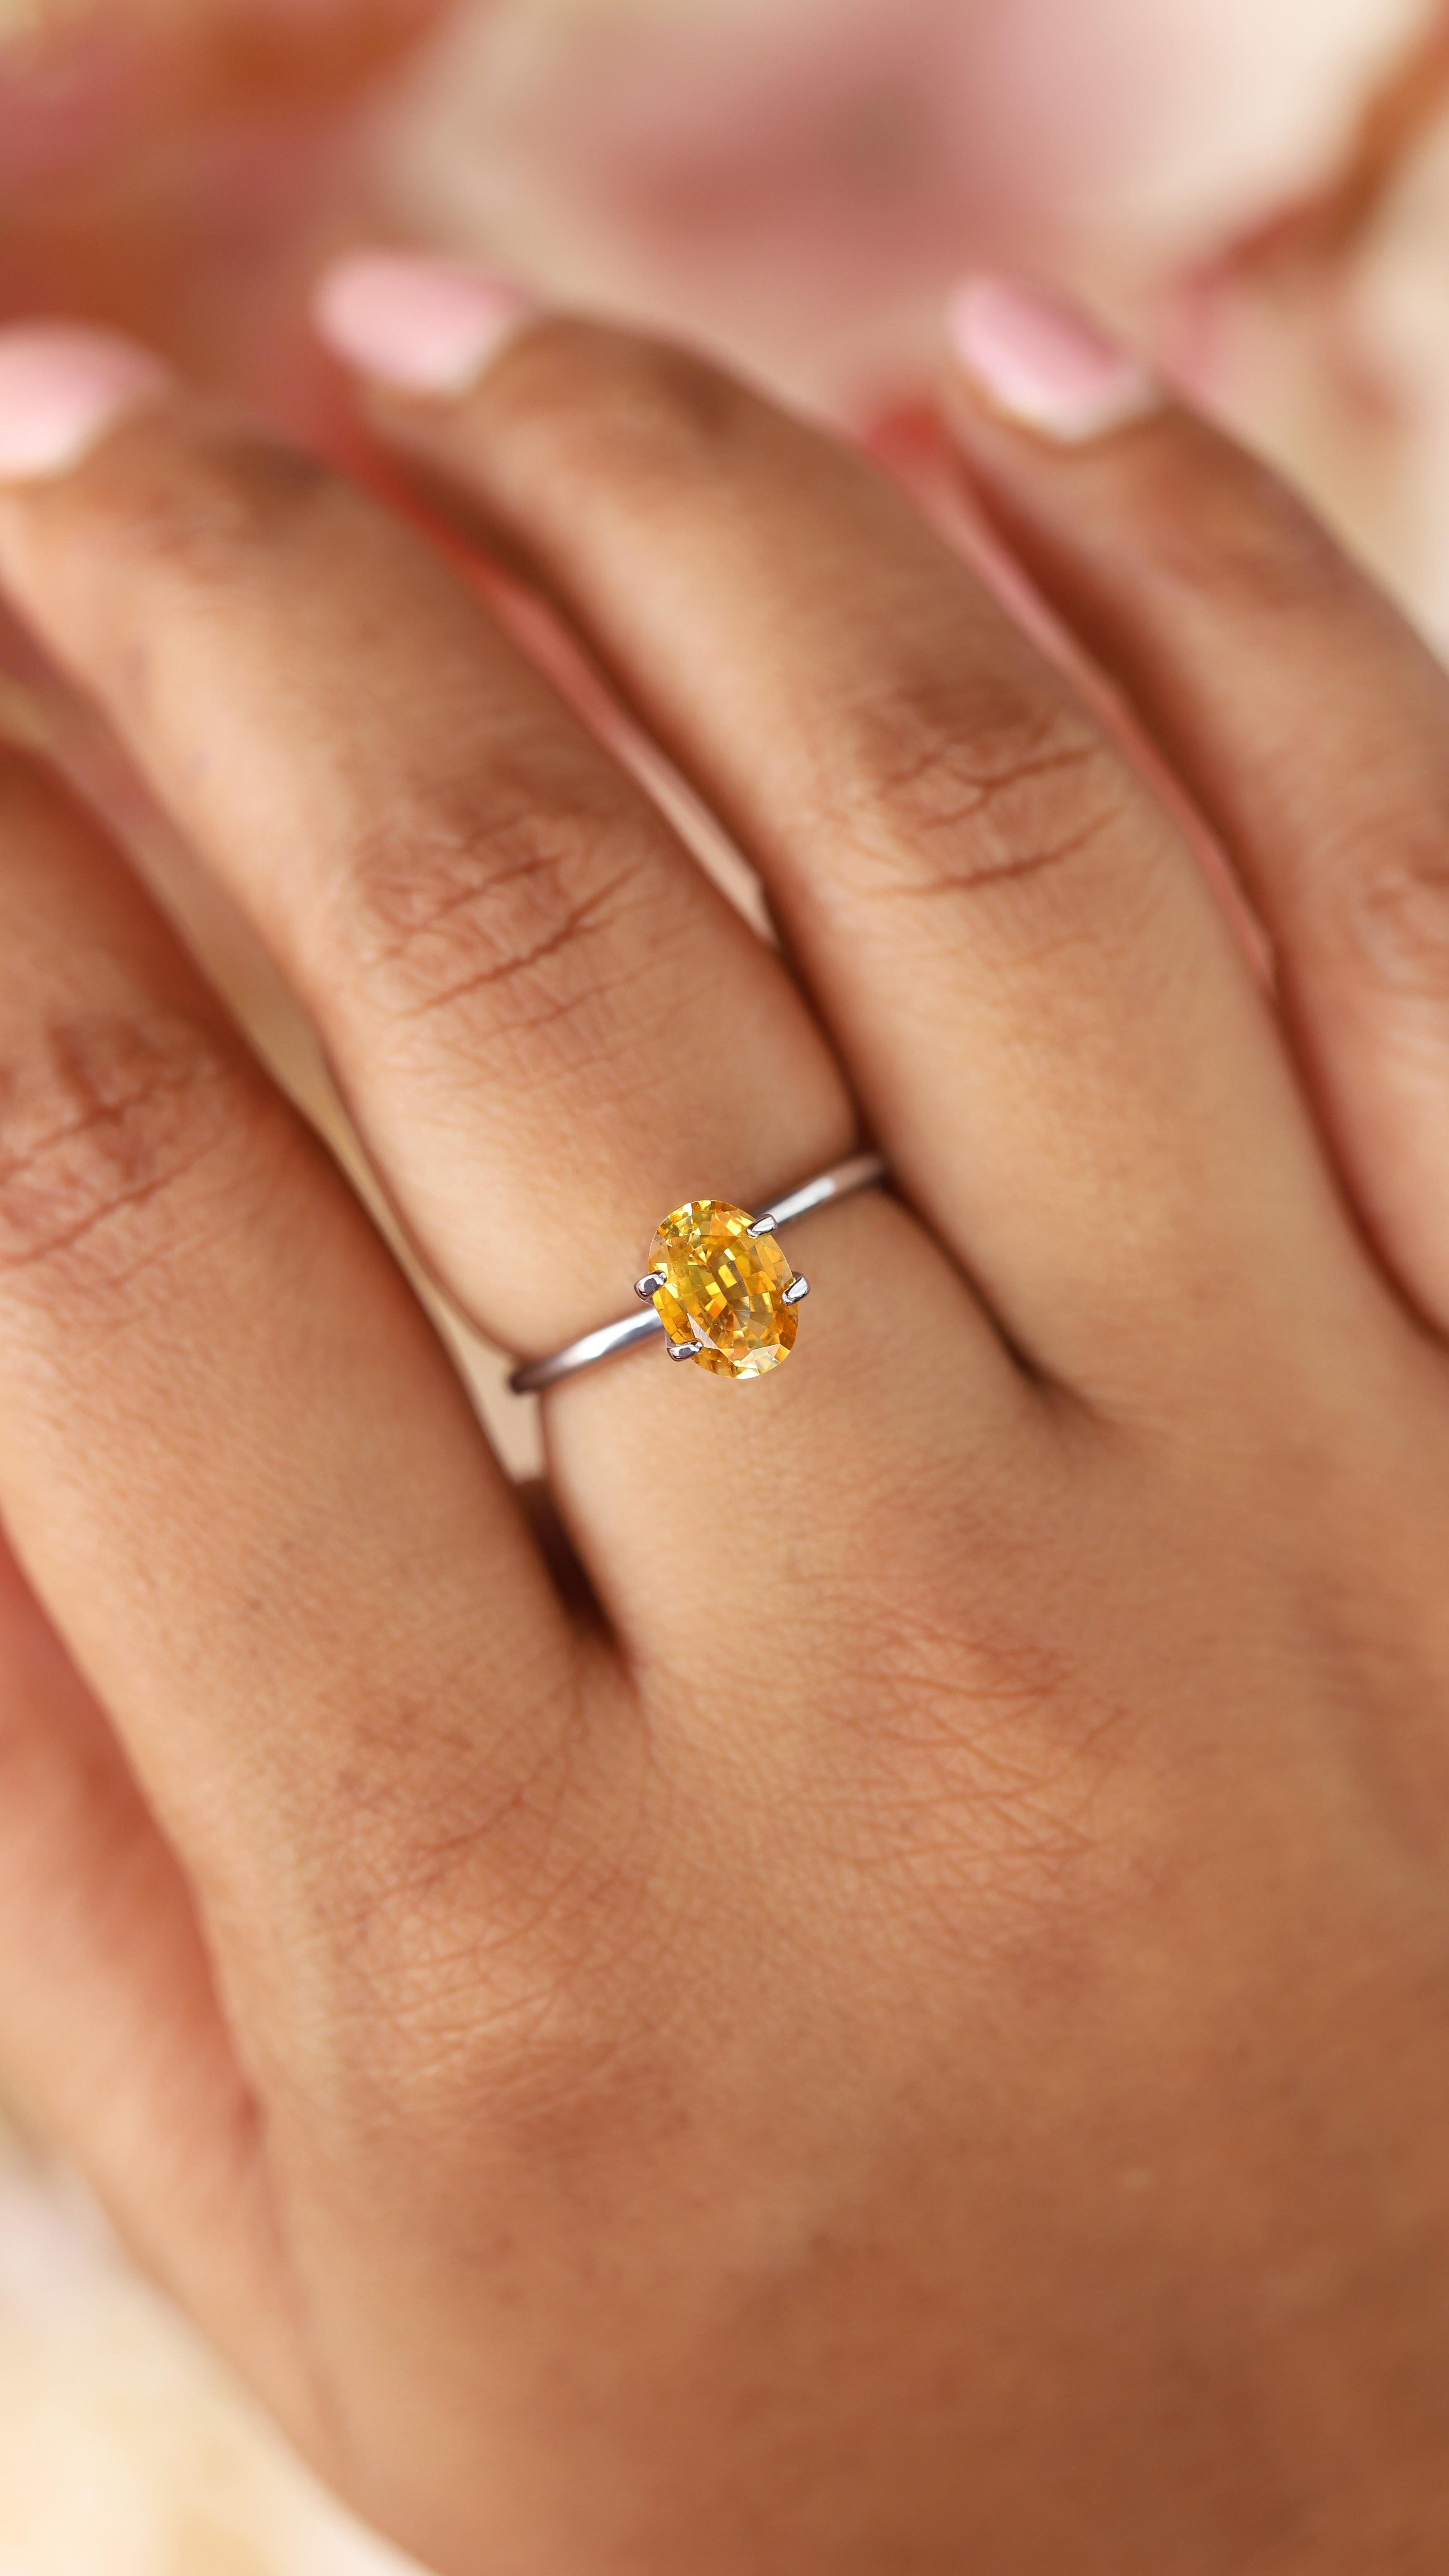 This golden amber hued sapphire gleams like a string of fairy lights in the night sky, casting an enchanting bright glow.
Natural golden amber sapphire. Sourced from ceylon. 1.42 ct. 

This magnificent yellow sapphire by KNS Gems is available for